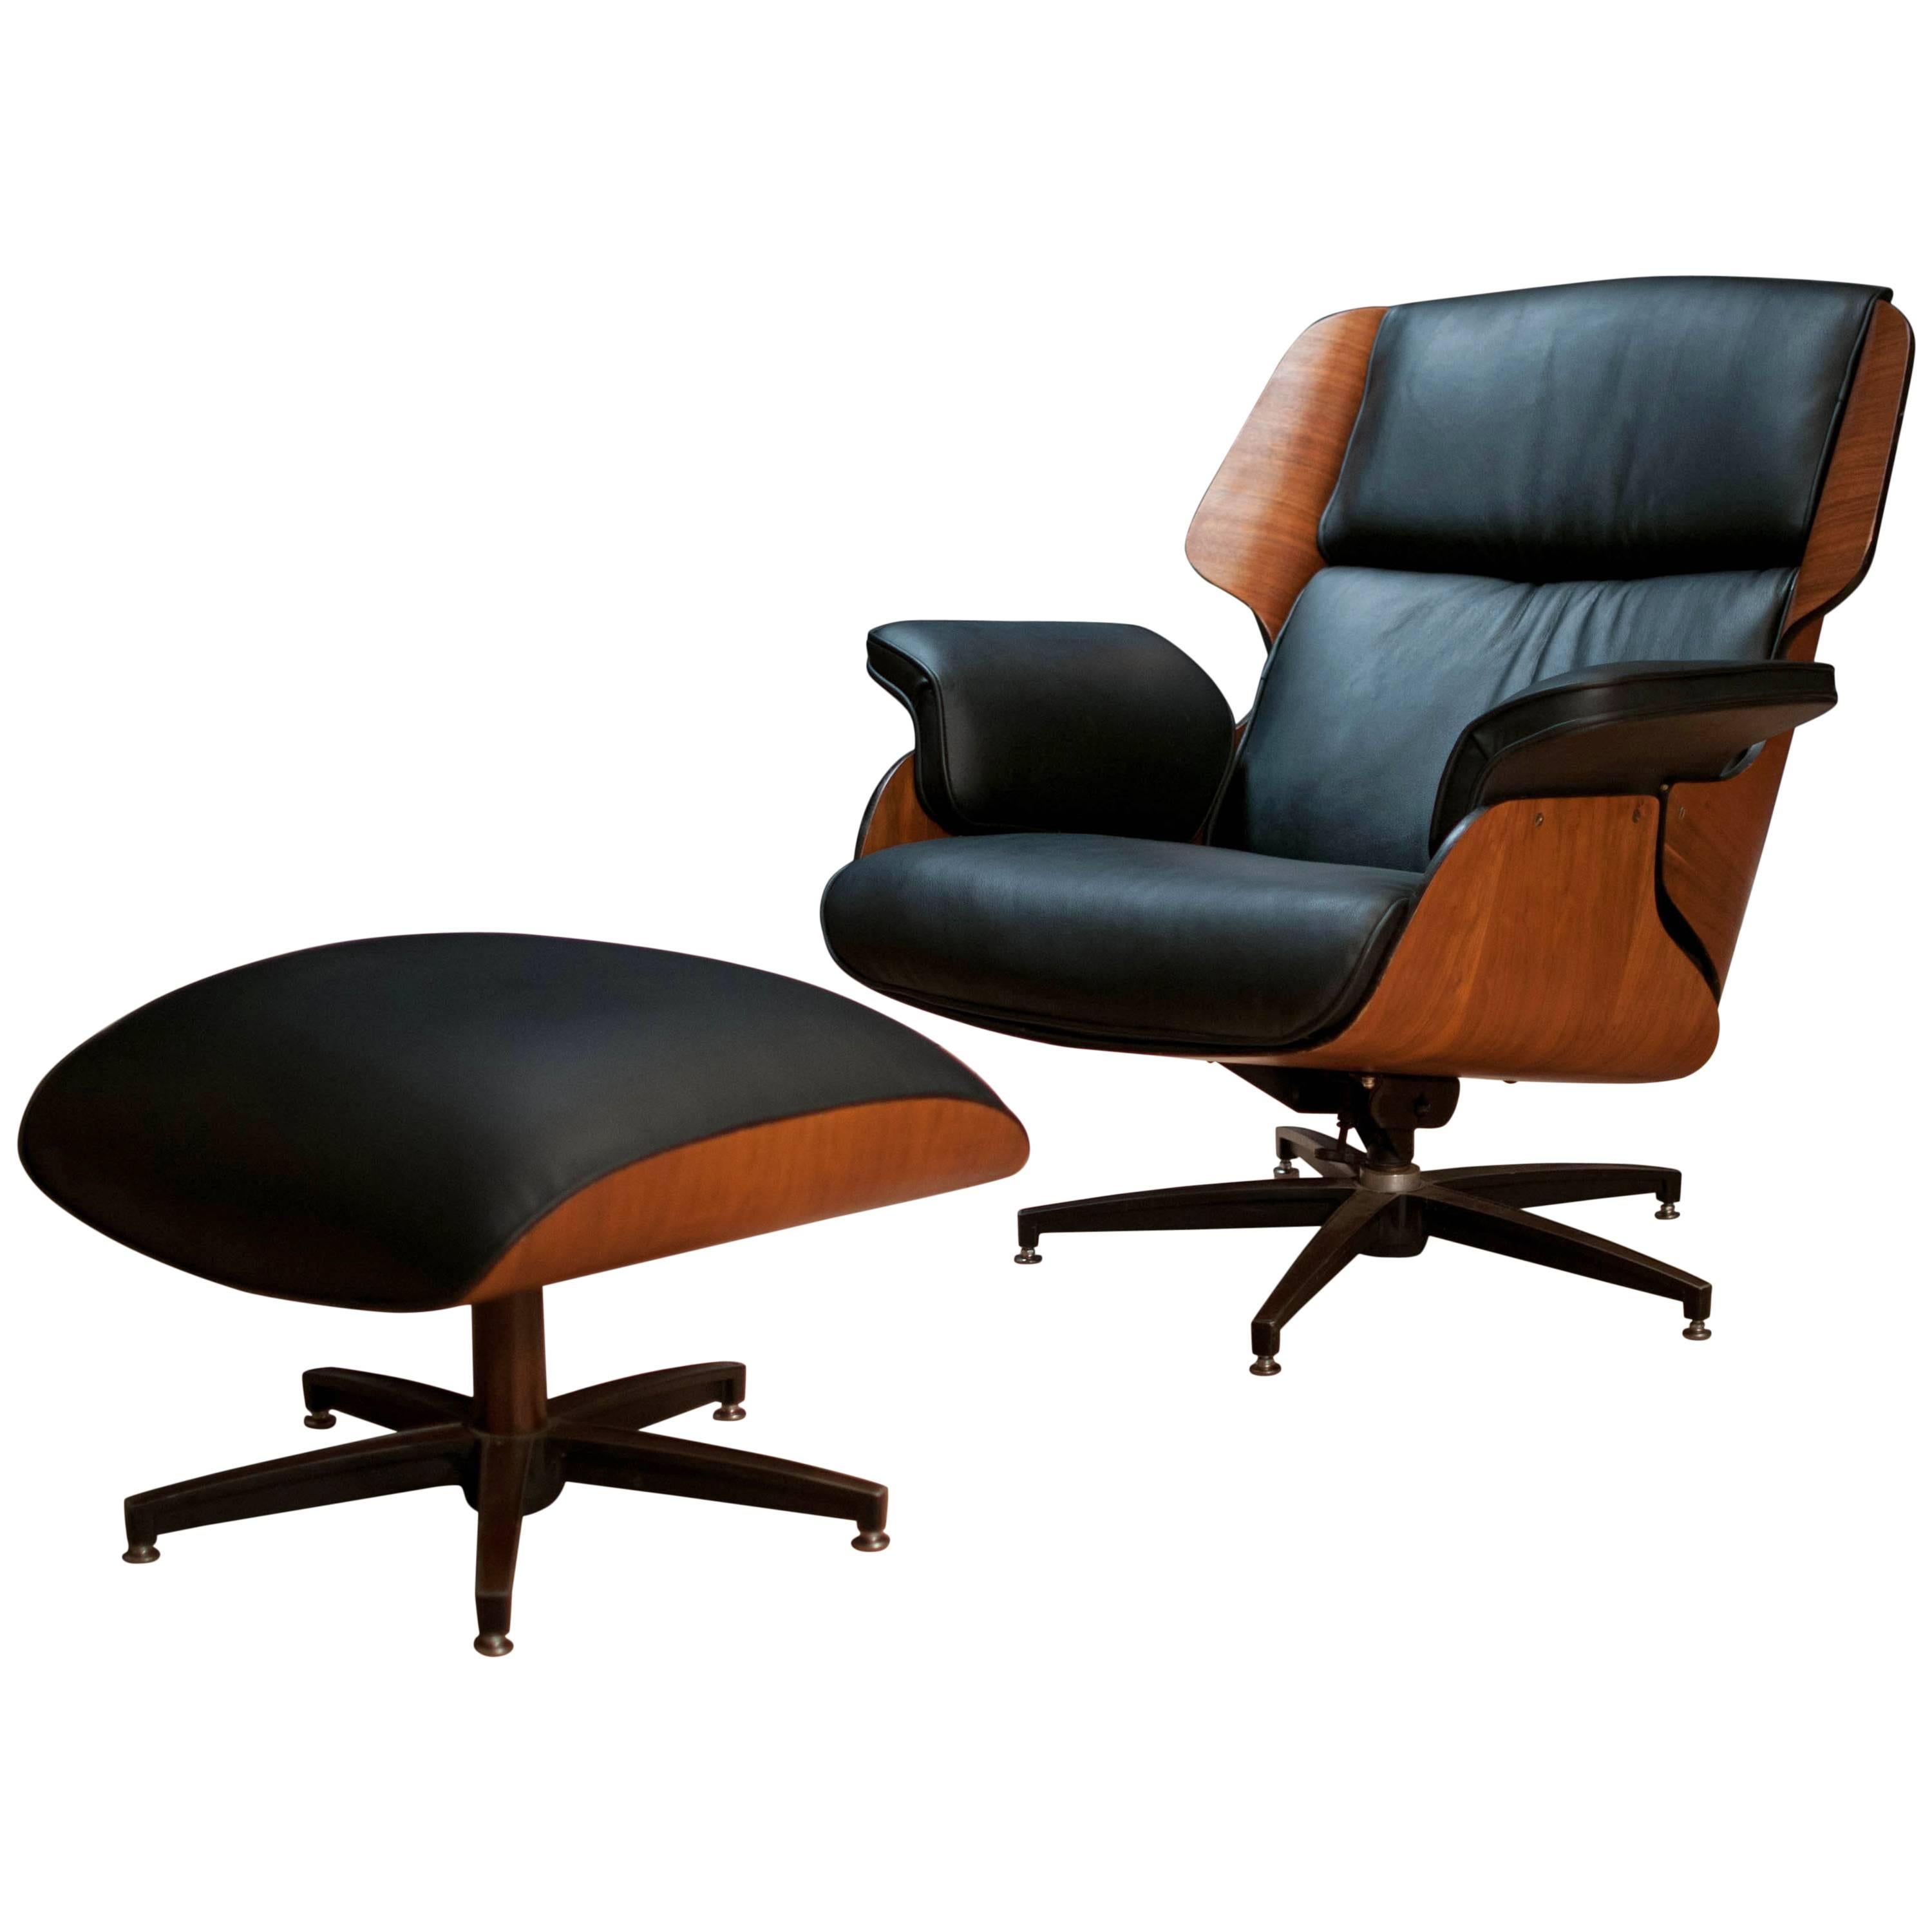 Drexel Declaration Leather Lounge Chair and Ottoman